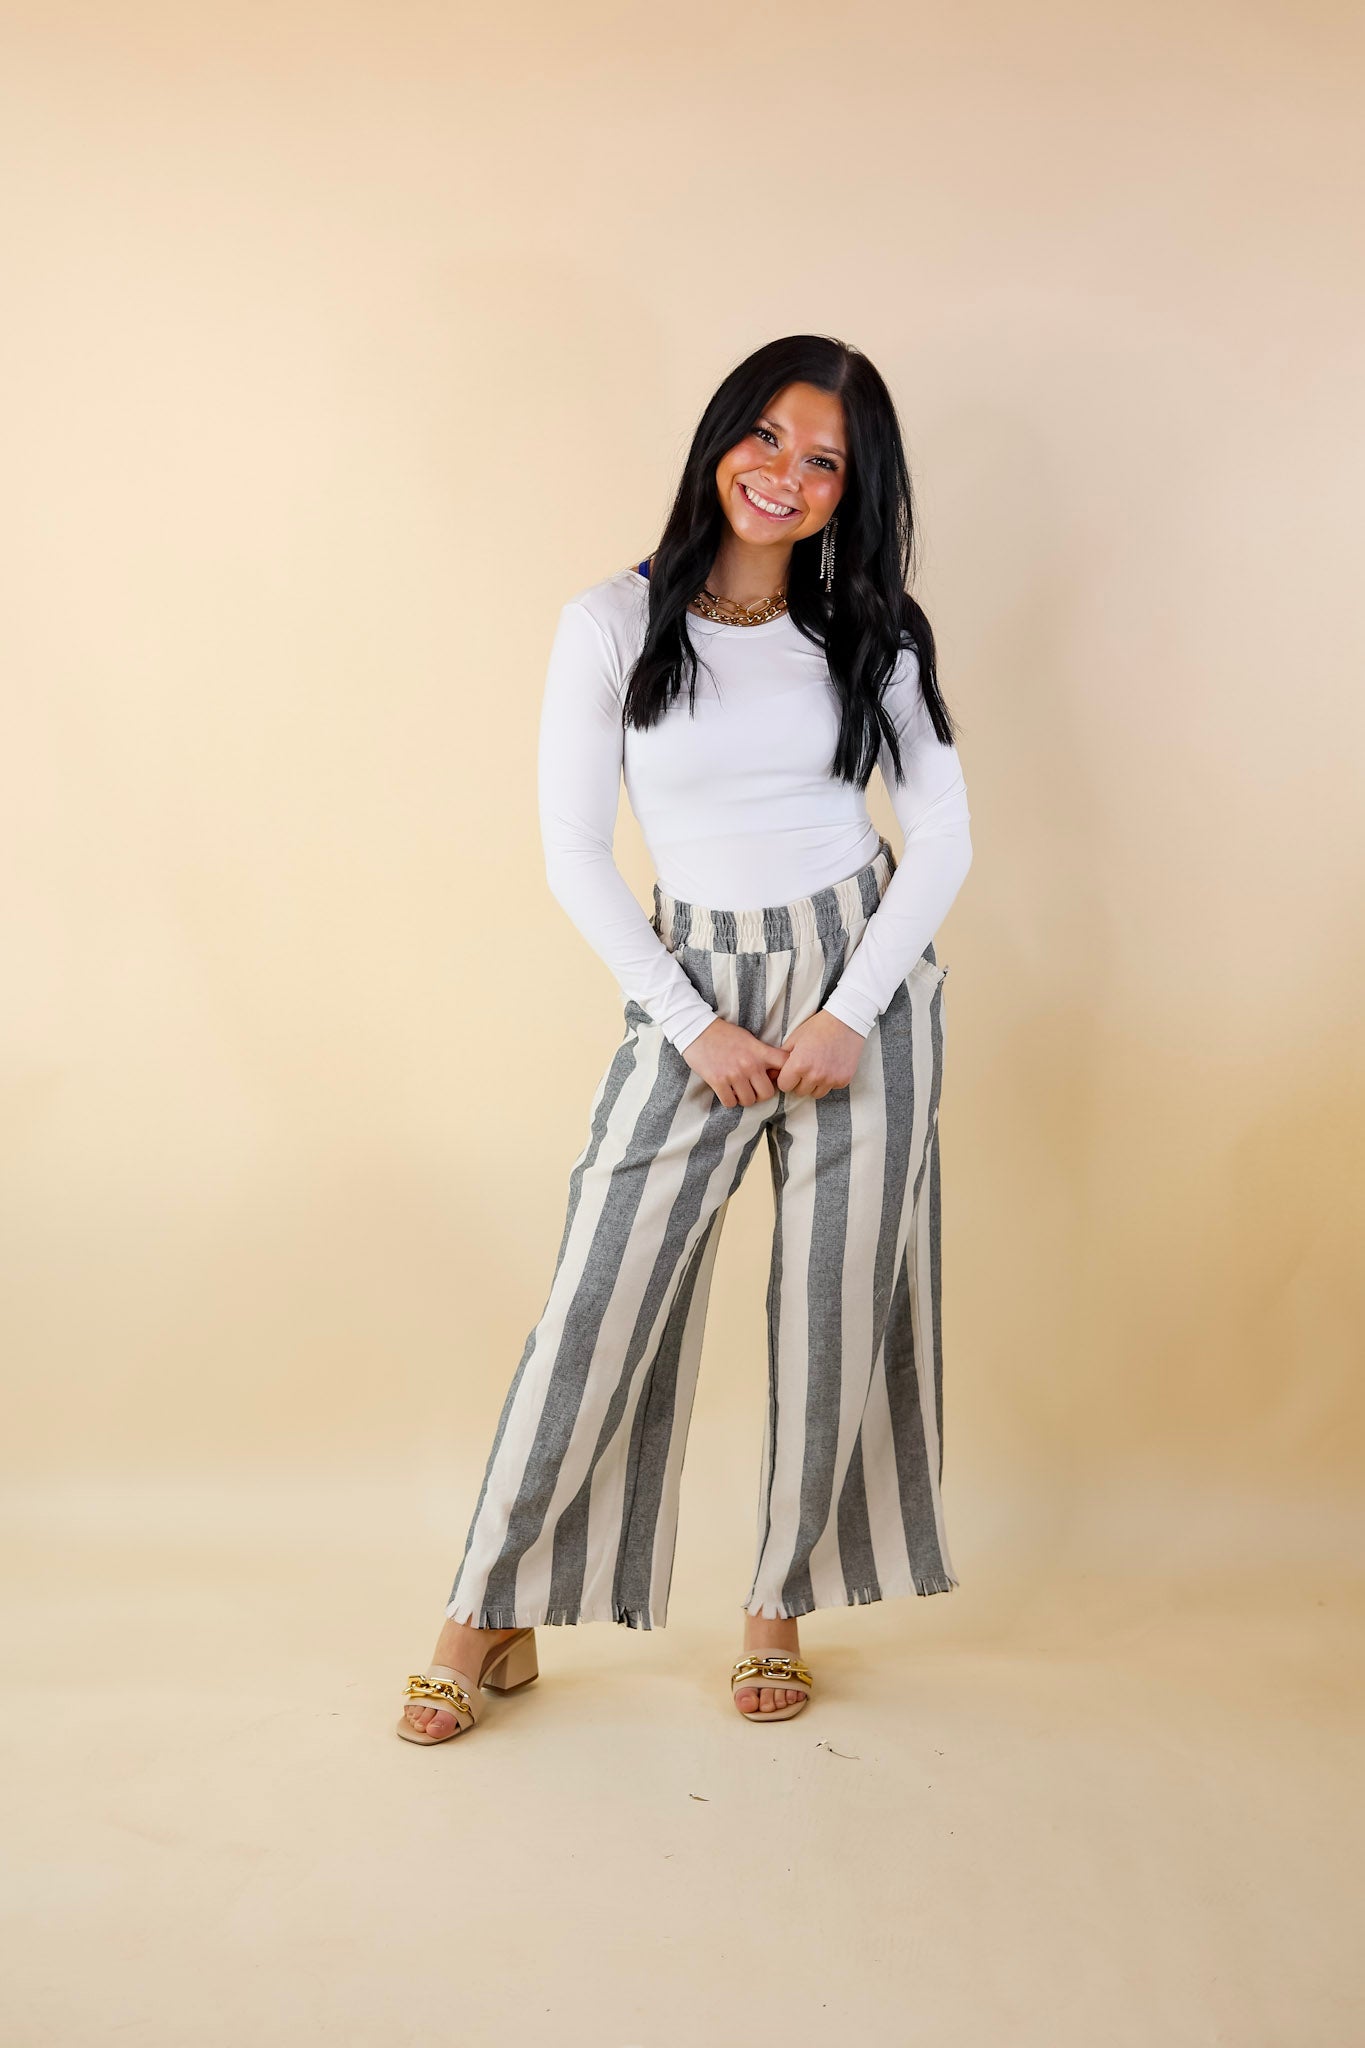 Right On Cue Elastic Waistband Striped Cropped Pants with Frayed Hem in Black - Giddy Up Glamour Boutique